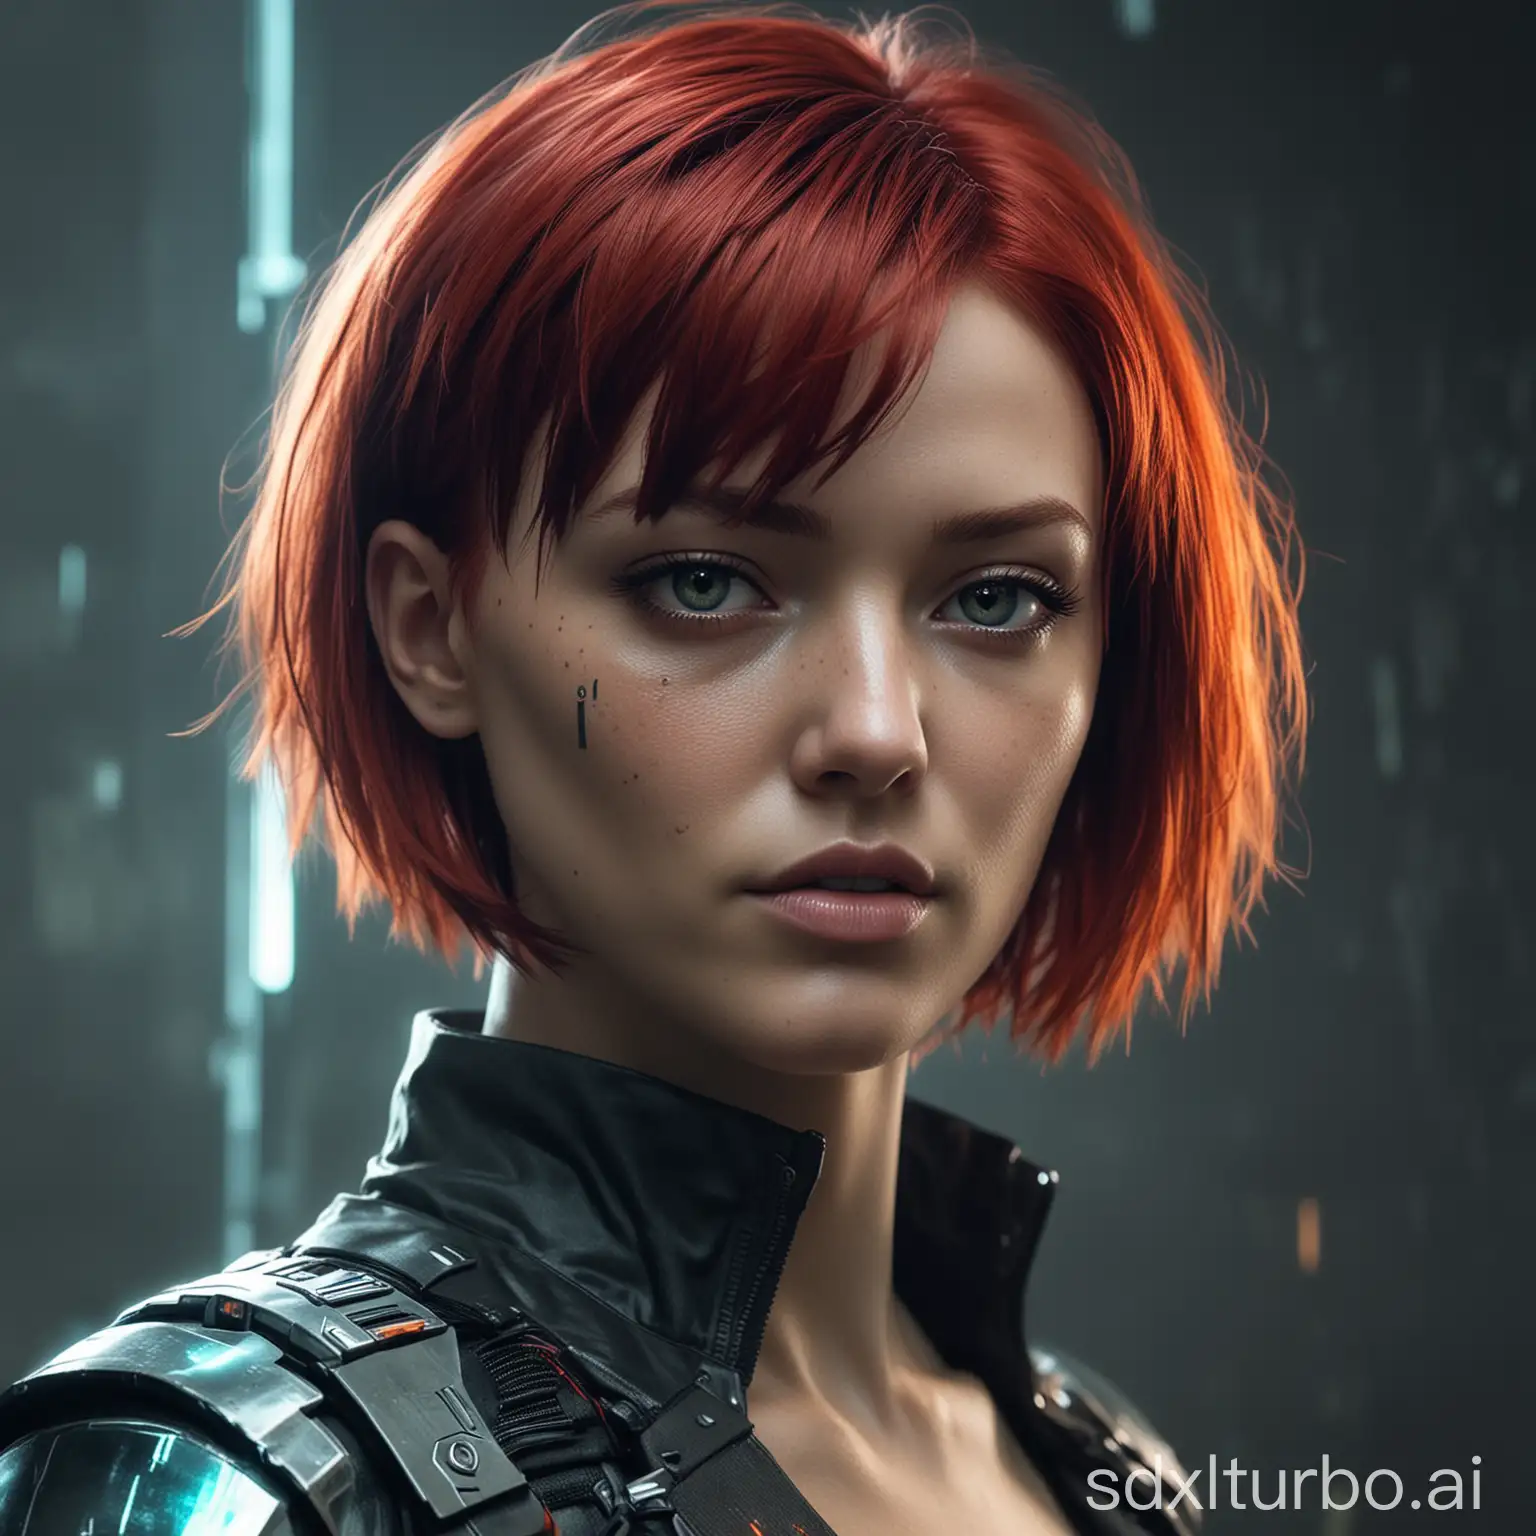 a cyberpunk woman with a short hair bob cut red-haired, and we could see that she is a hologram